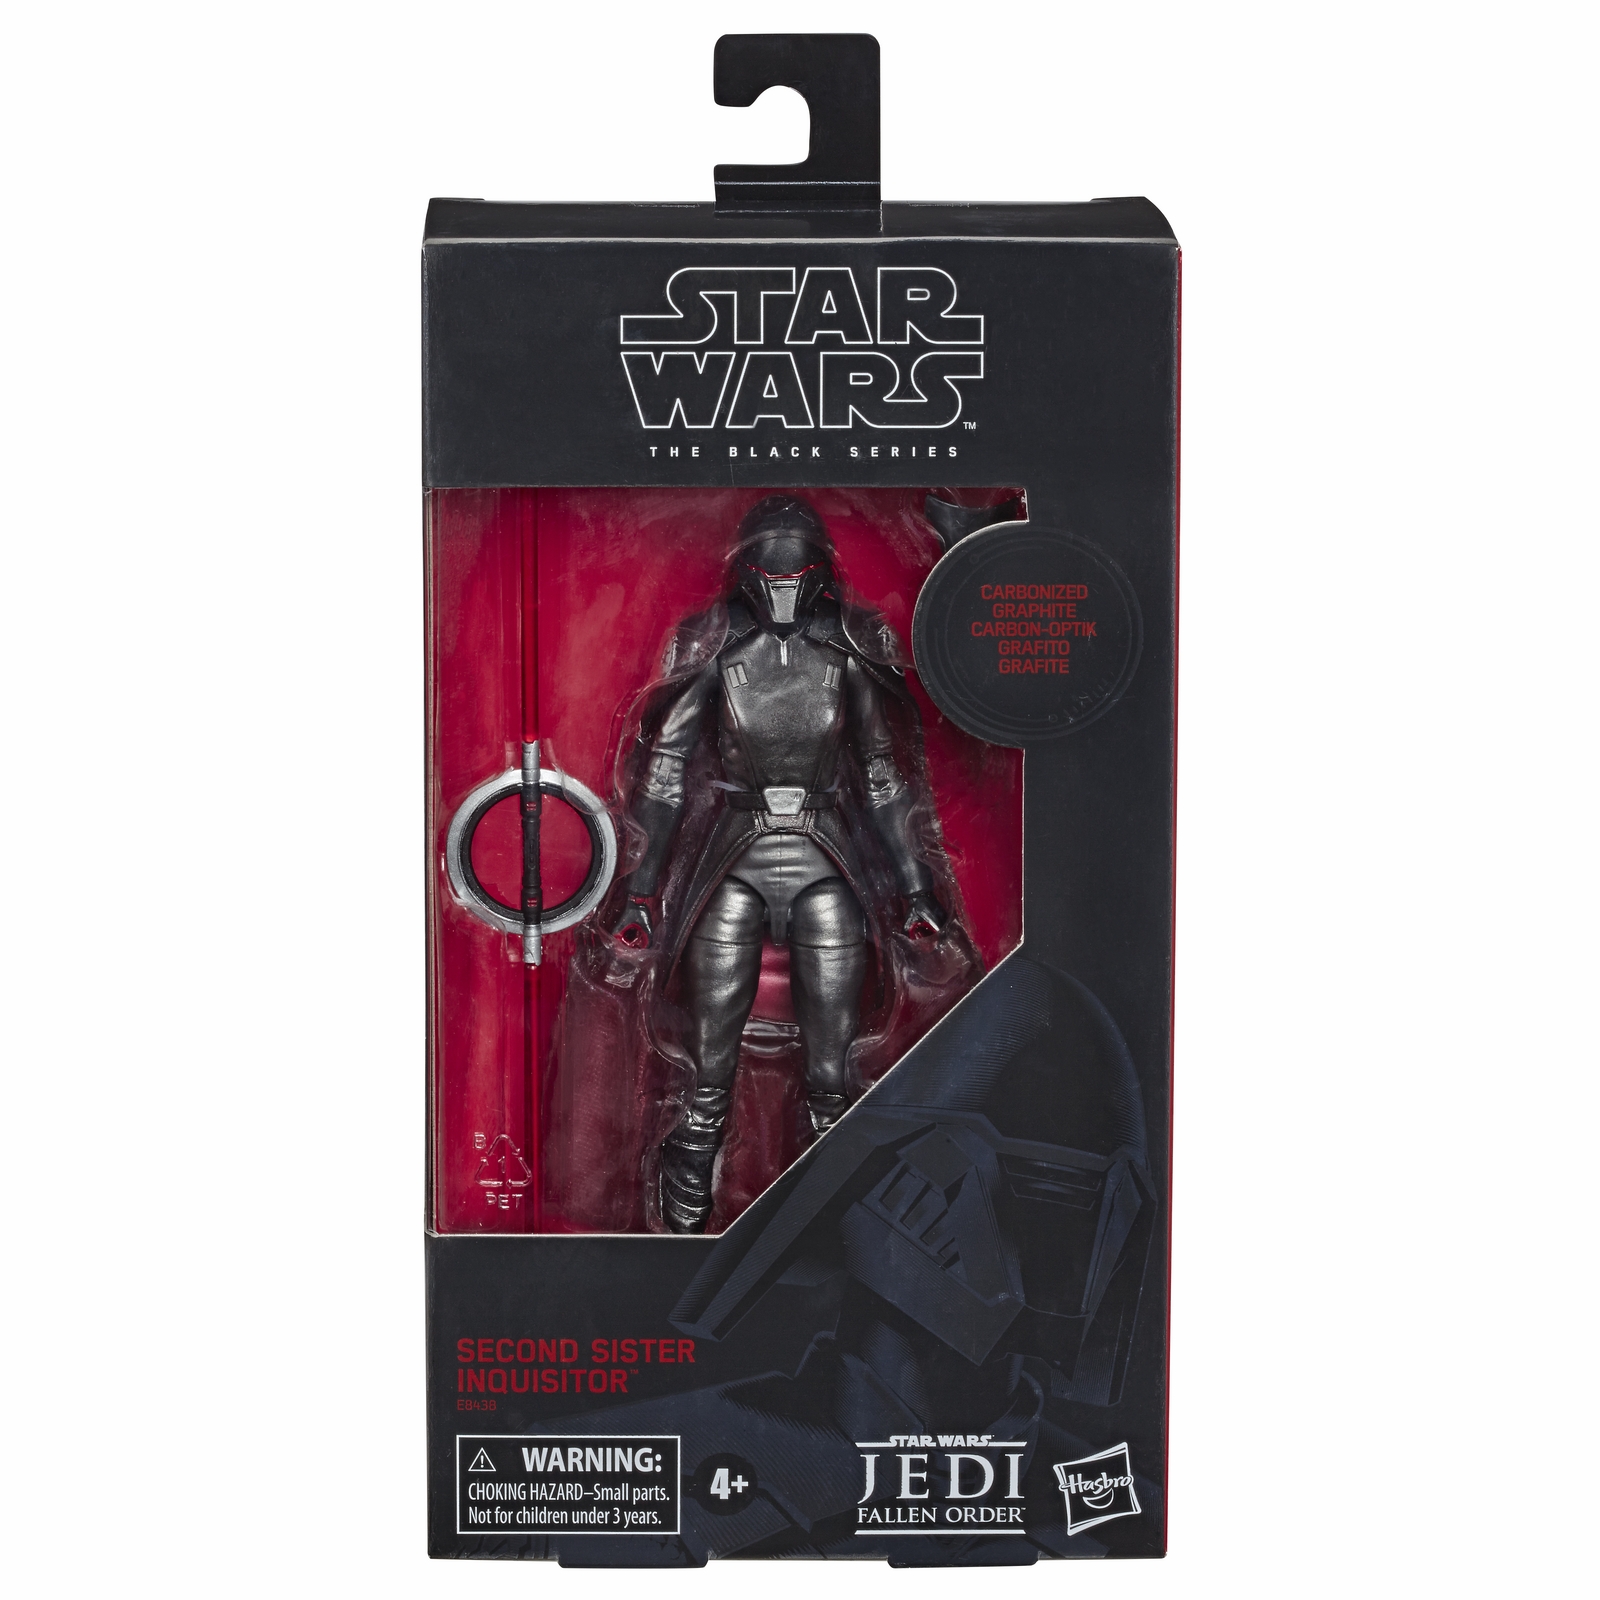 STAR WARS THE BLACK SERIES 6-INCH SECOND SISTER INQUISITOR CARBONIZED COLLECTION Figure - in pck.jpg